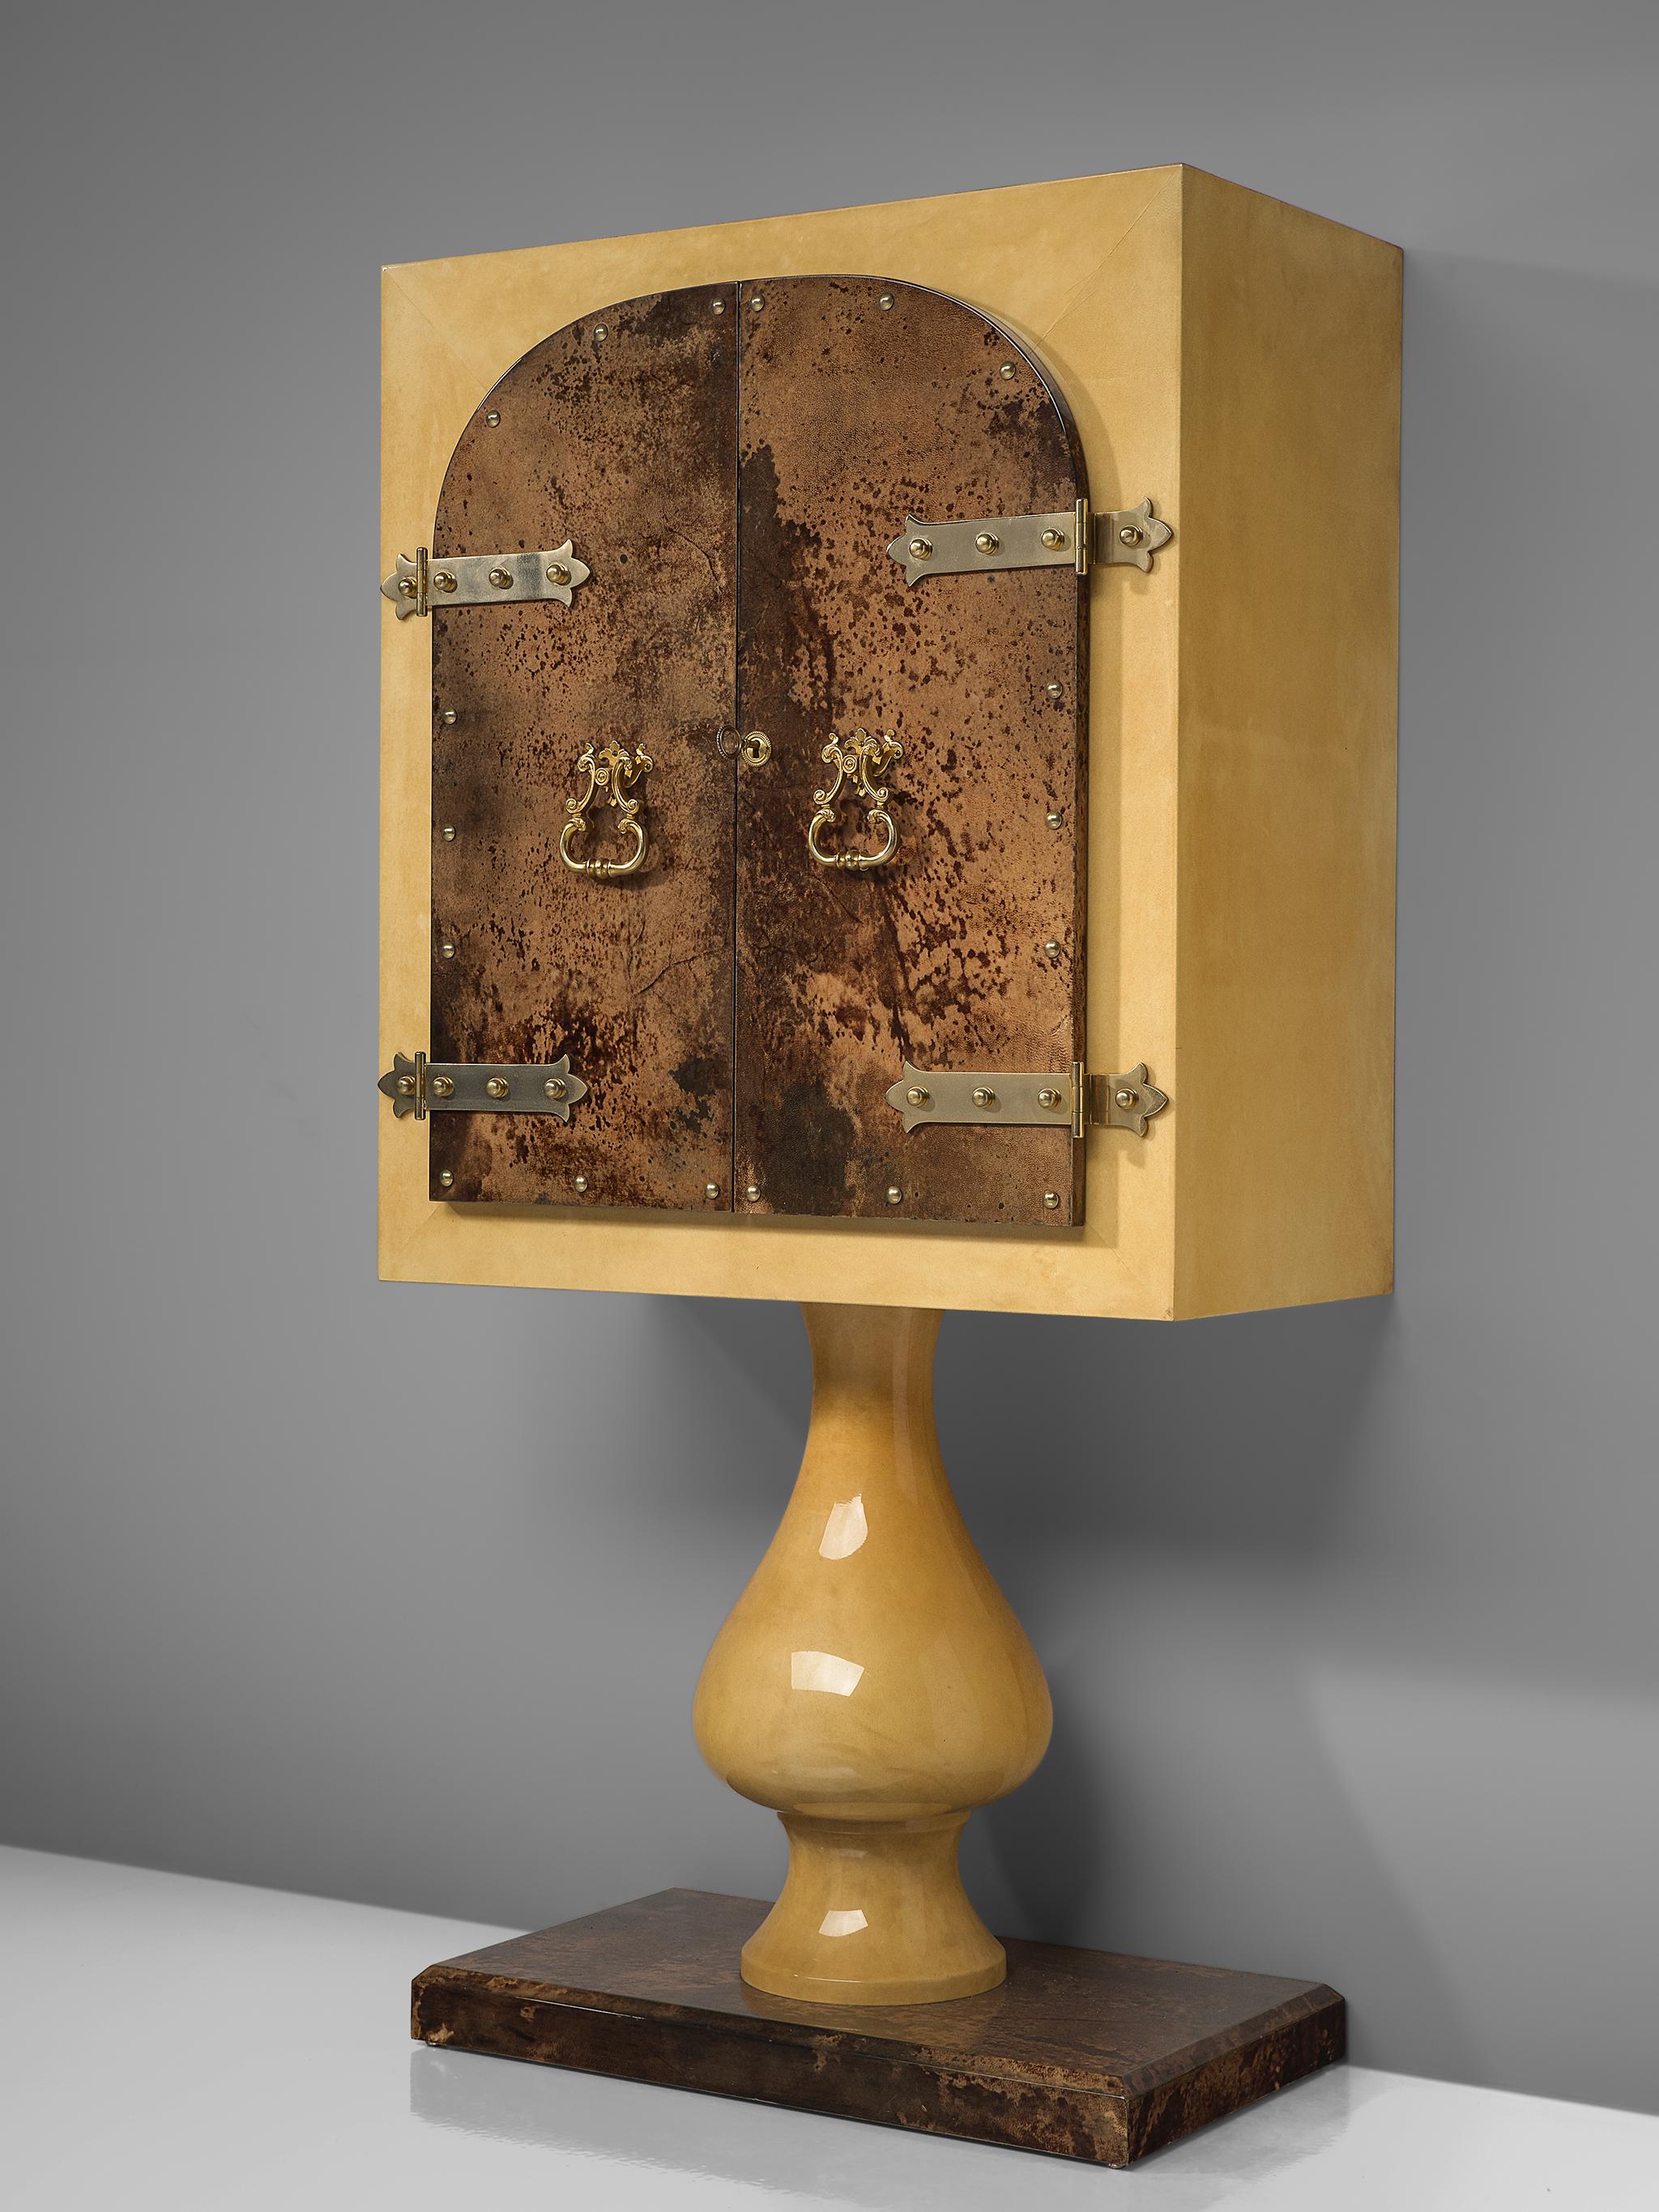 Aldo Tura, lacquered goatskin pedestal bar cabinet, lacquered wood, goatskin and brass, Italy, 1950s.

Decorative cabinet designed by Italian Aldo Tura in the 1950s. It has been finished with a high gloss lacquer. Under this layer a stained goatskin